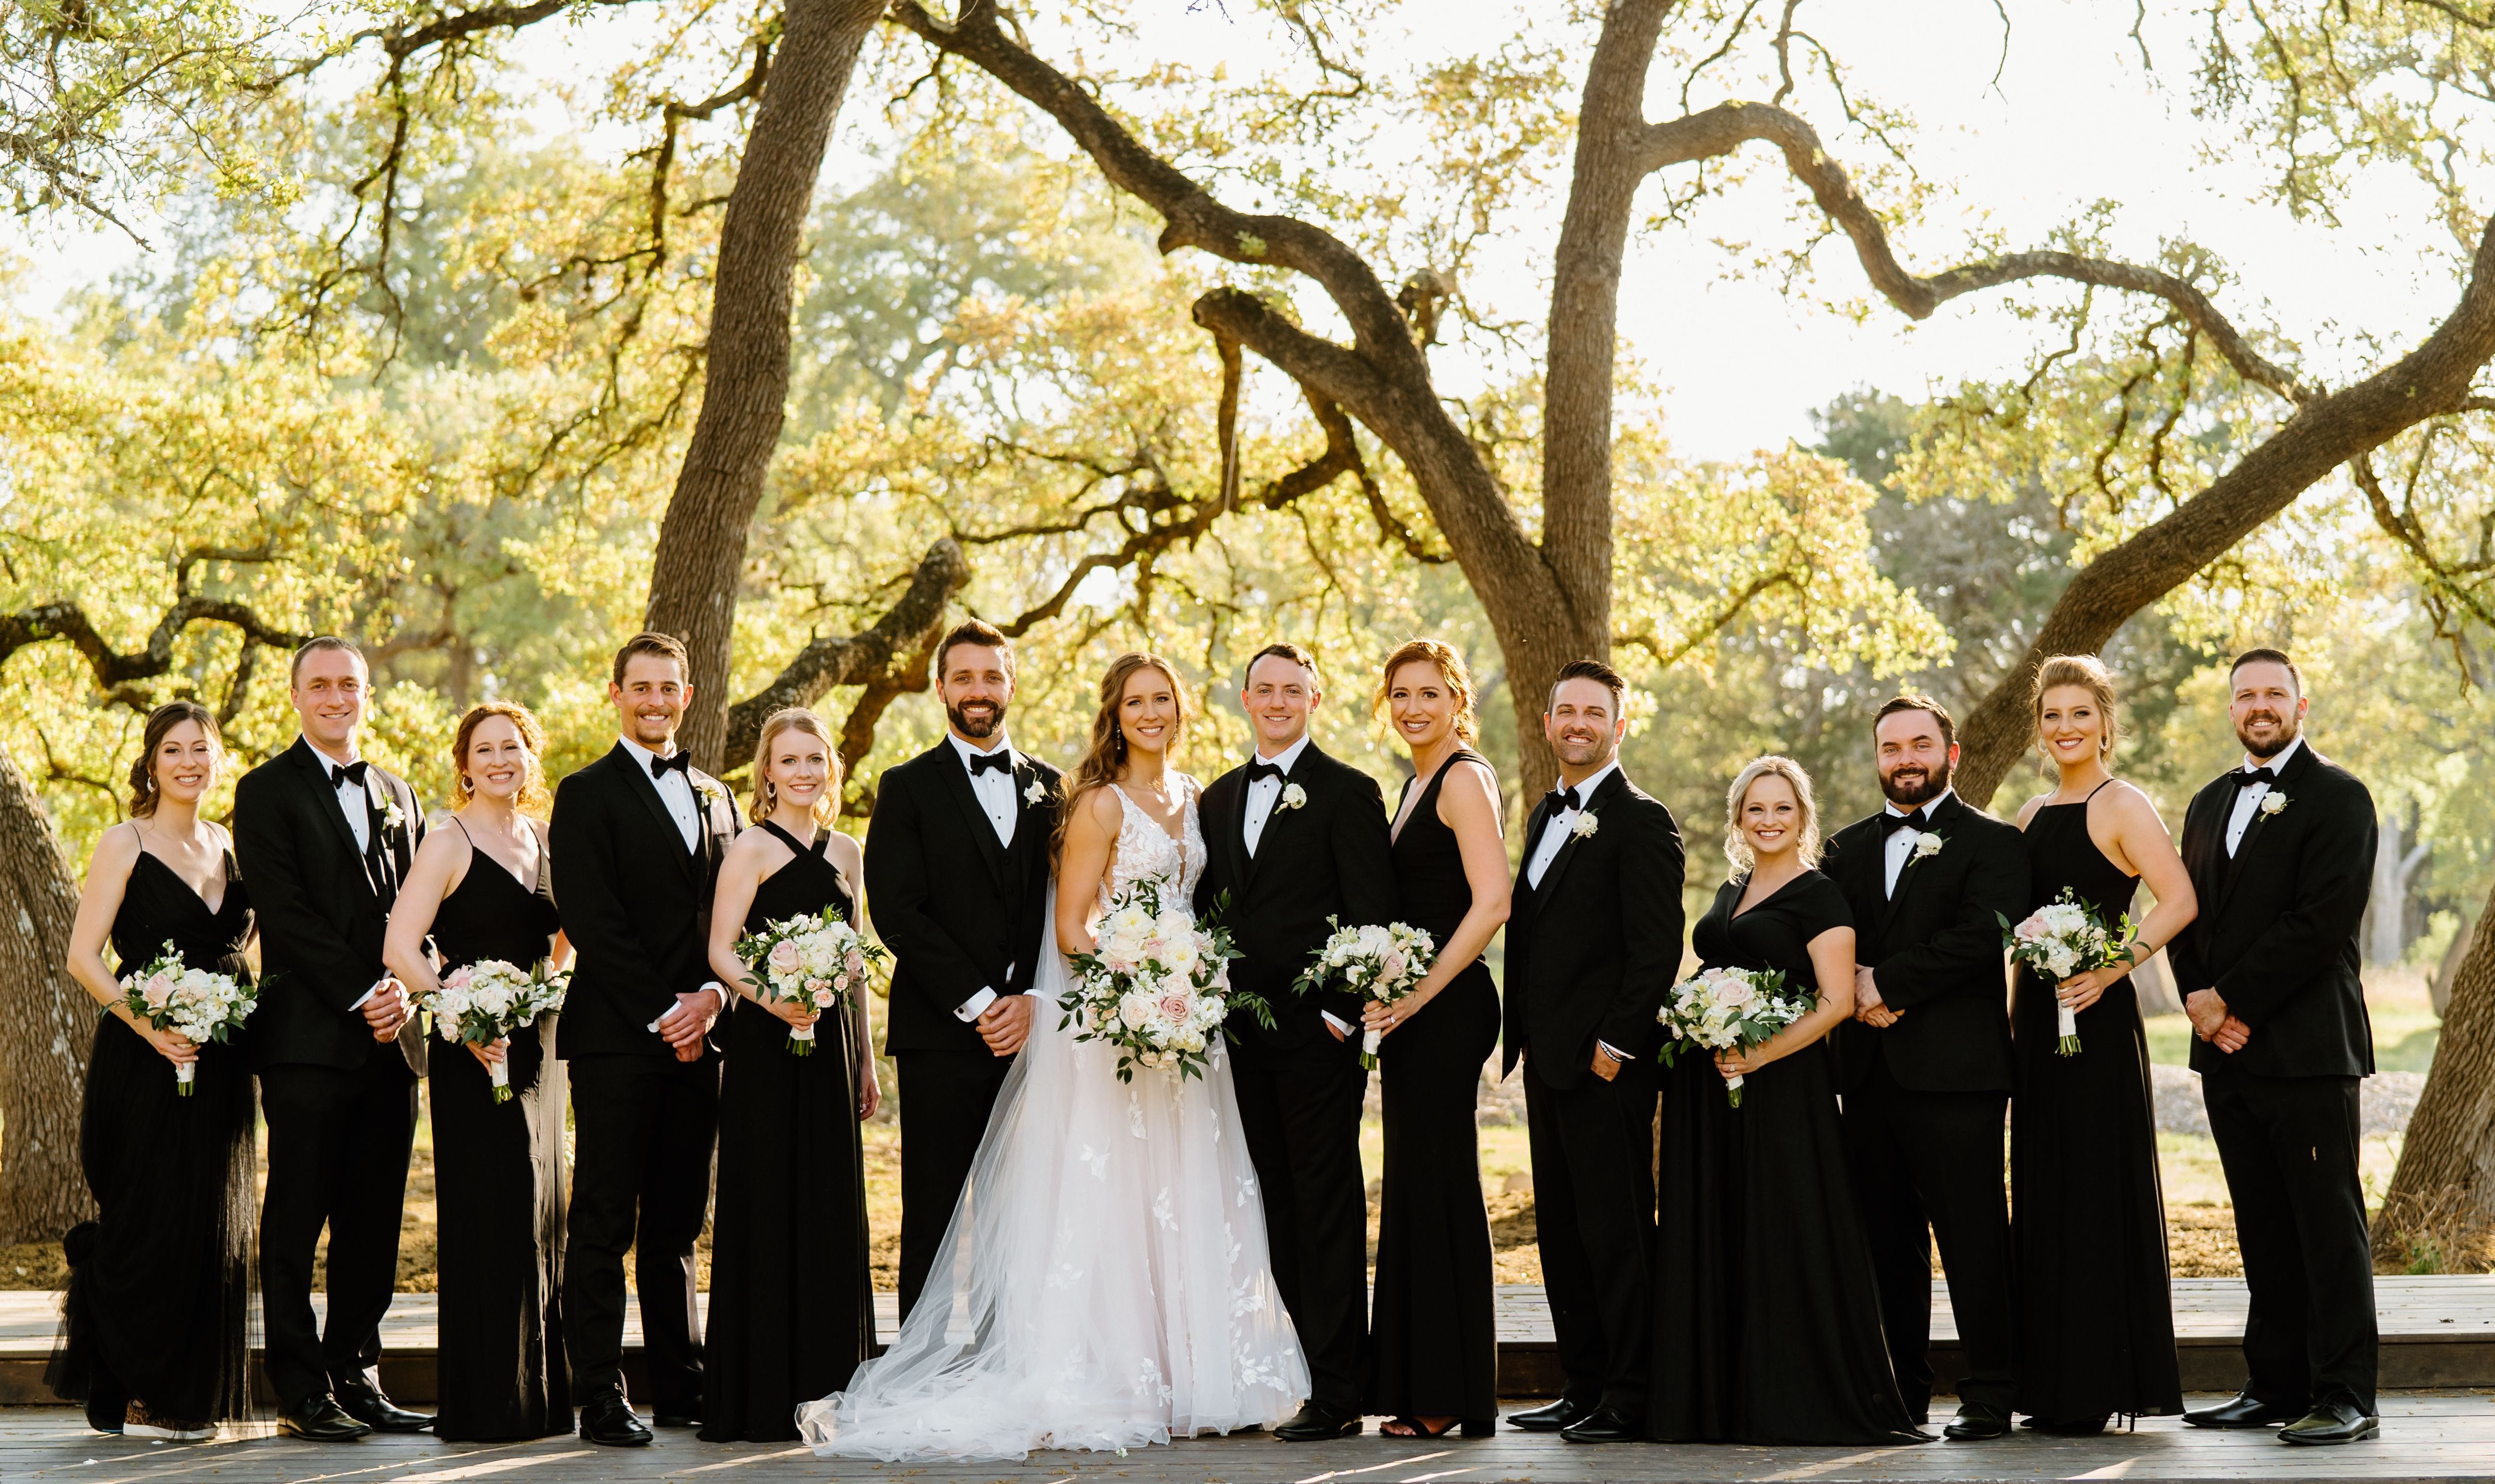 A bride and groom stand in the center of their wedding party adorned in black tie attire after the wedding ceremony with trees and natural light in the background.